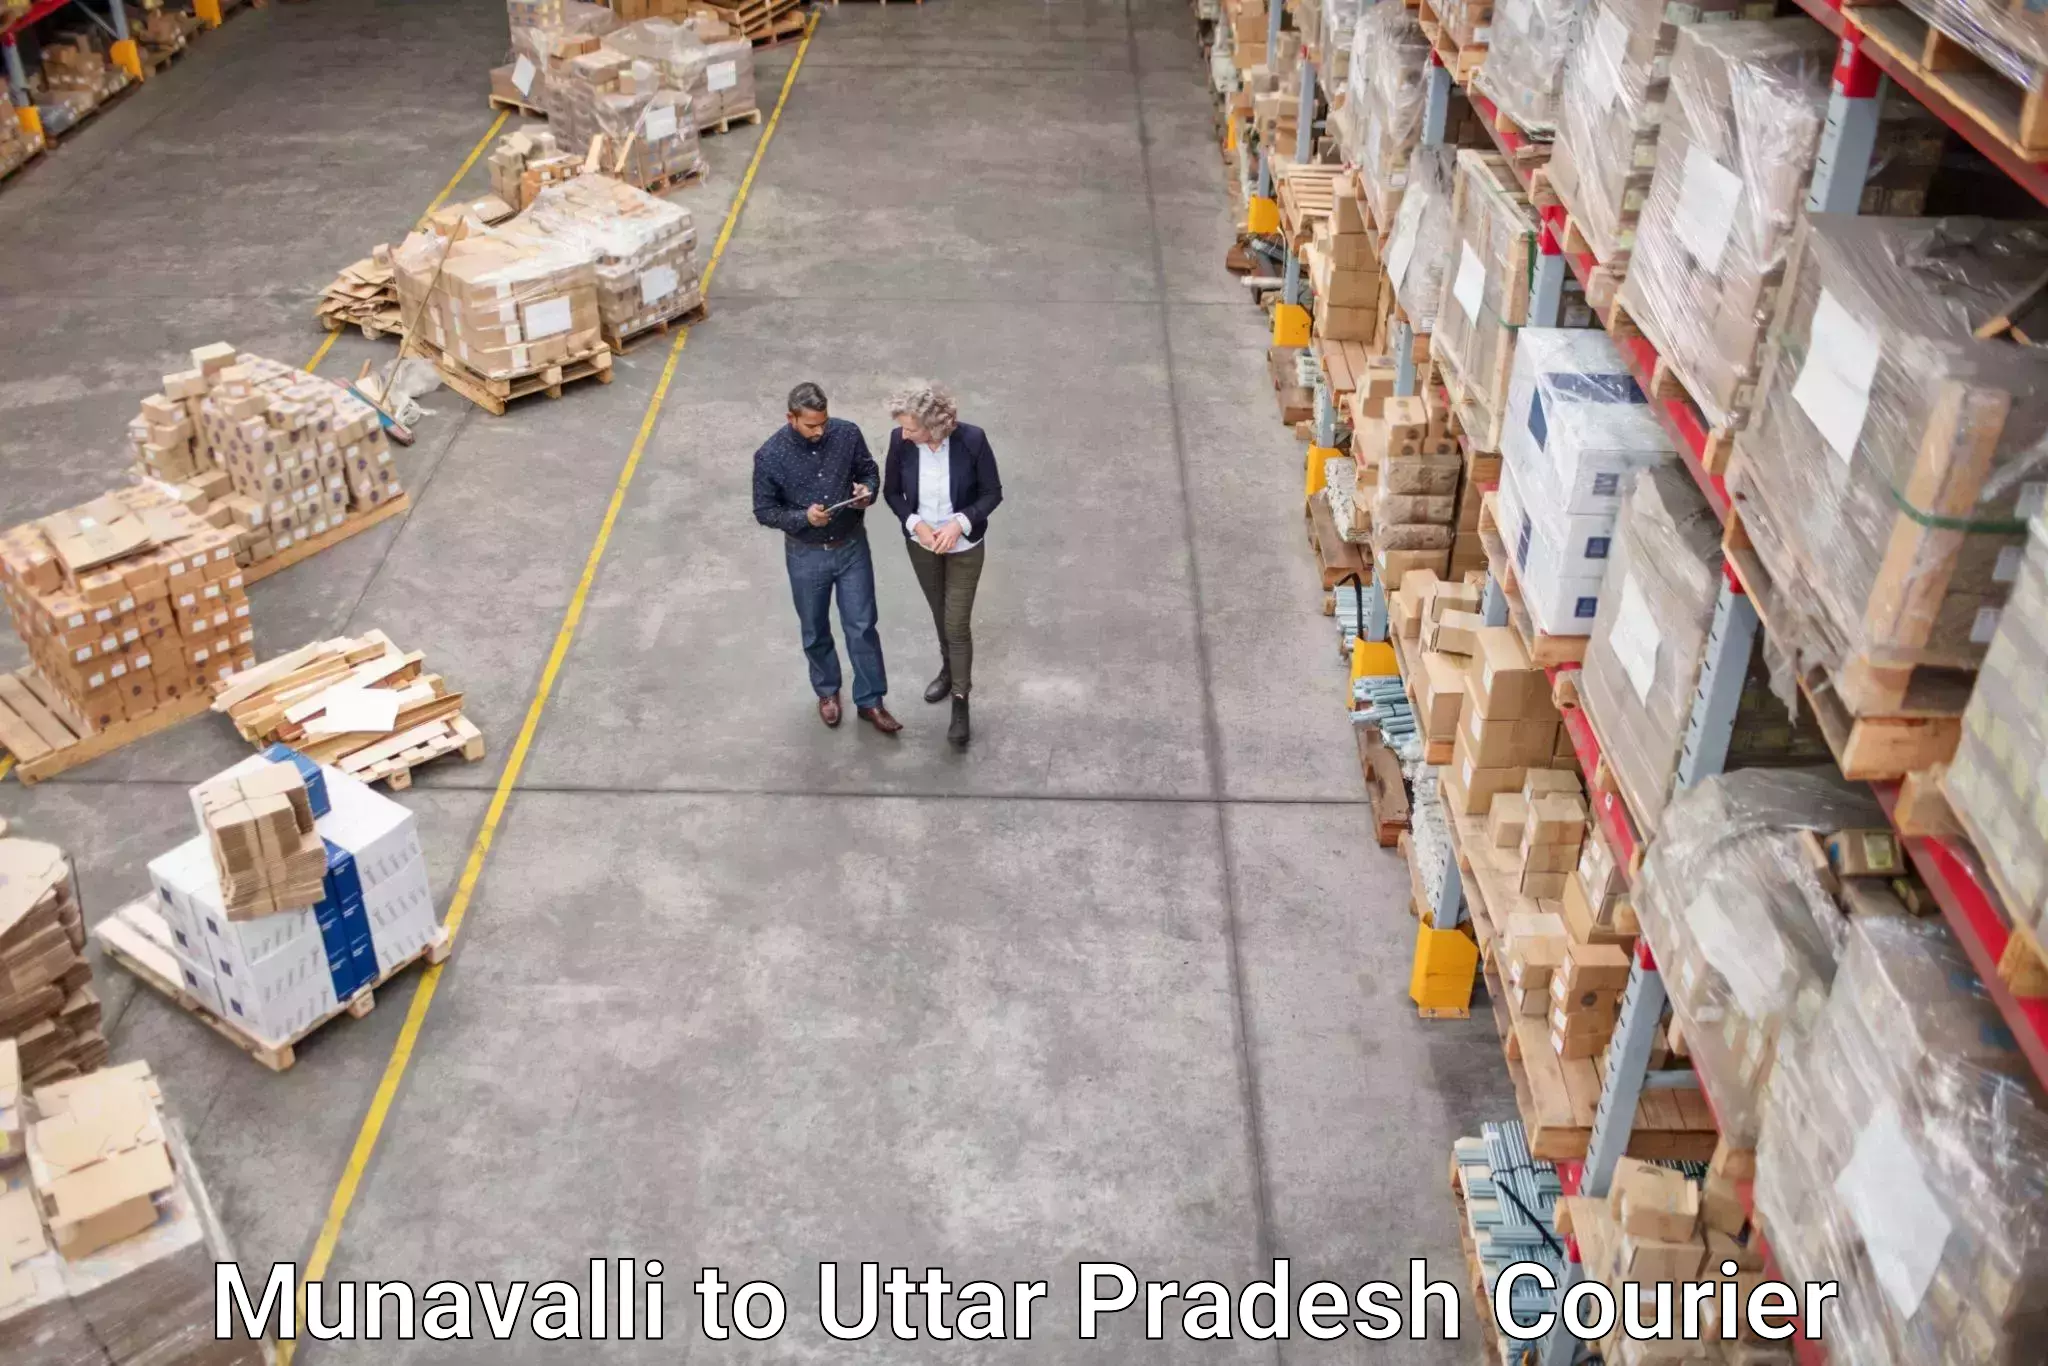 Automated parcel services Munavalli to Agra